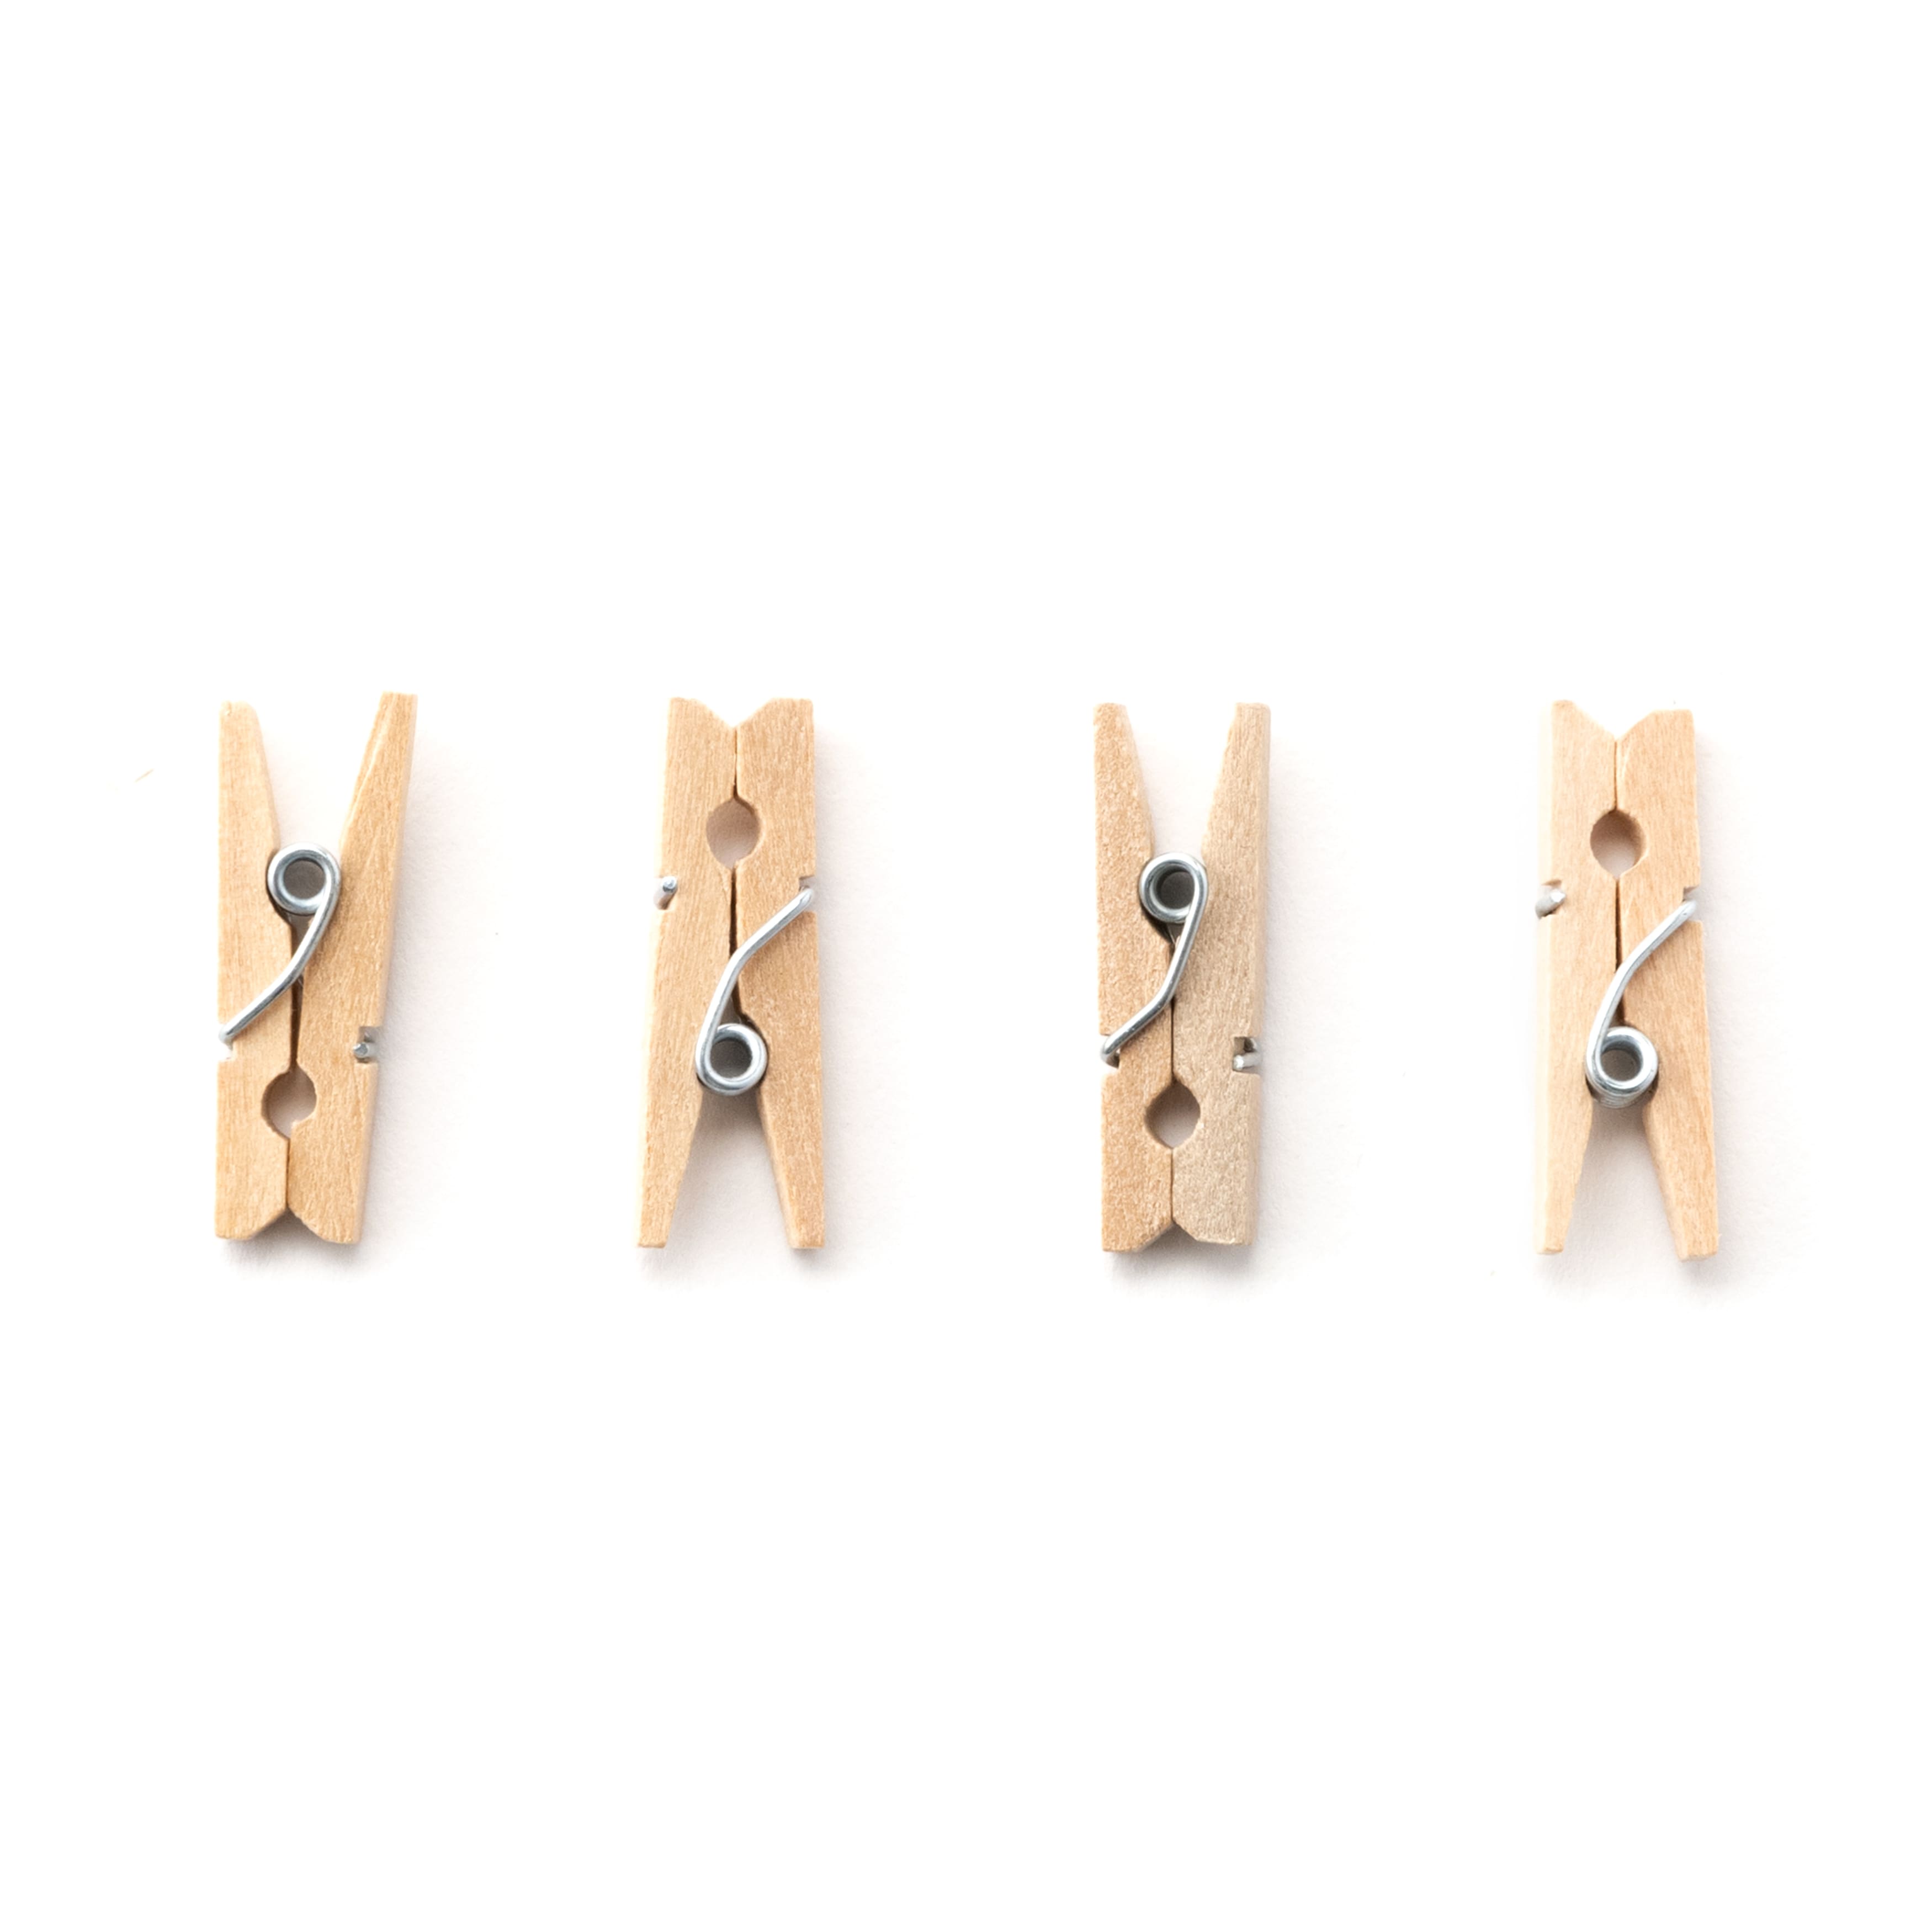 12 Packs: 50 Ct. (600 Total) Tiny Wood Clothespins by Creatology, Boy's, Beige